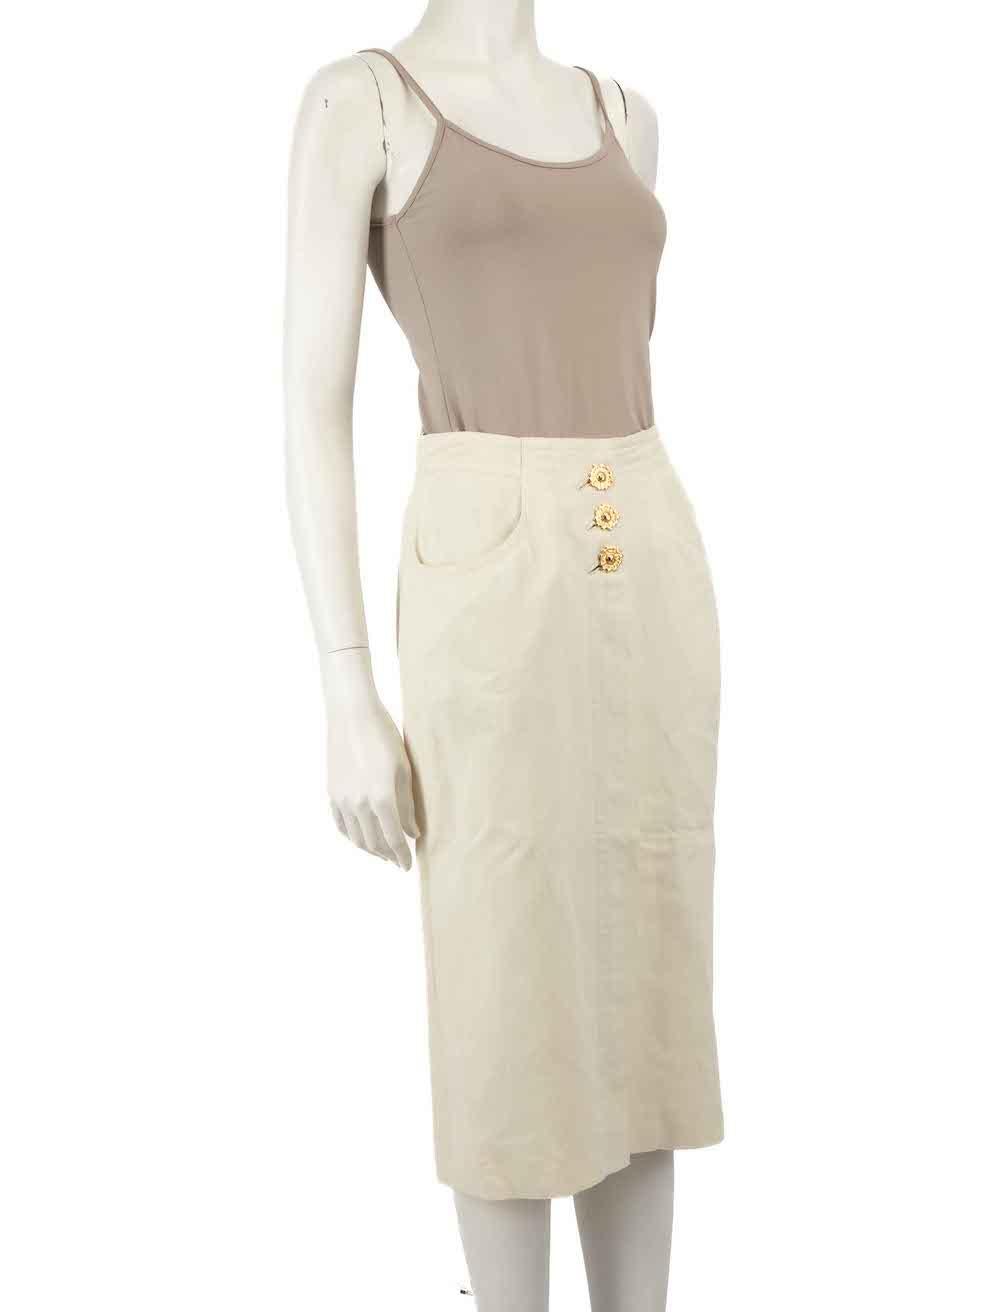 CONDITION is Very good. Minimal wear to skirt is evident. Minimal wear to the front with plucks to the weave and discoloured marks on this used Louis Féraud designer resale item.
 
 
 
 Details
 
 
 Ecru
 
 Viscose
 
 Straight skirt
 
 Midi length
